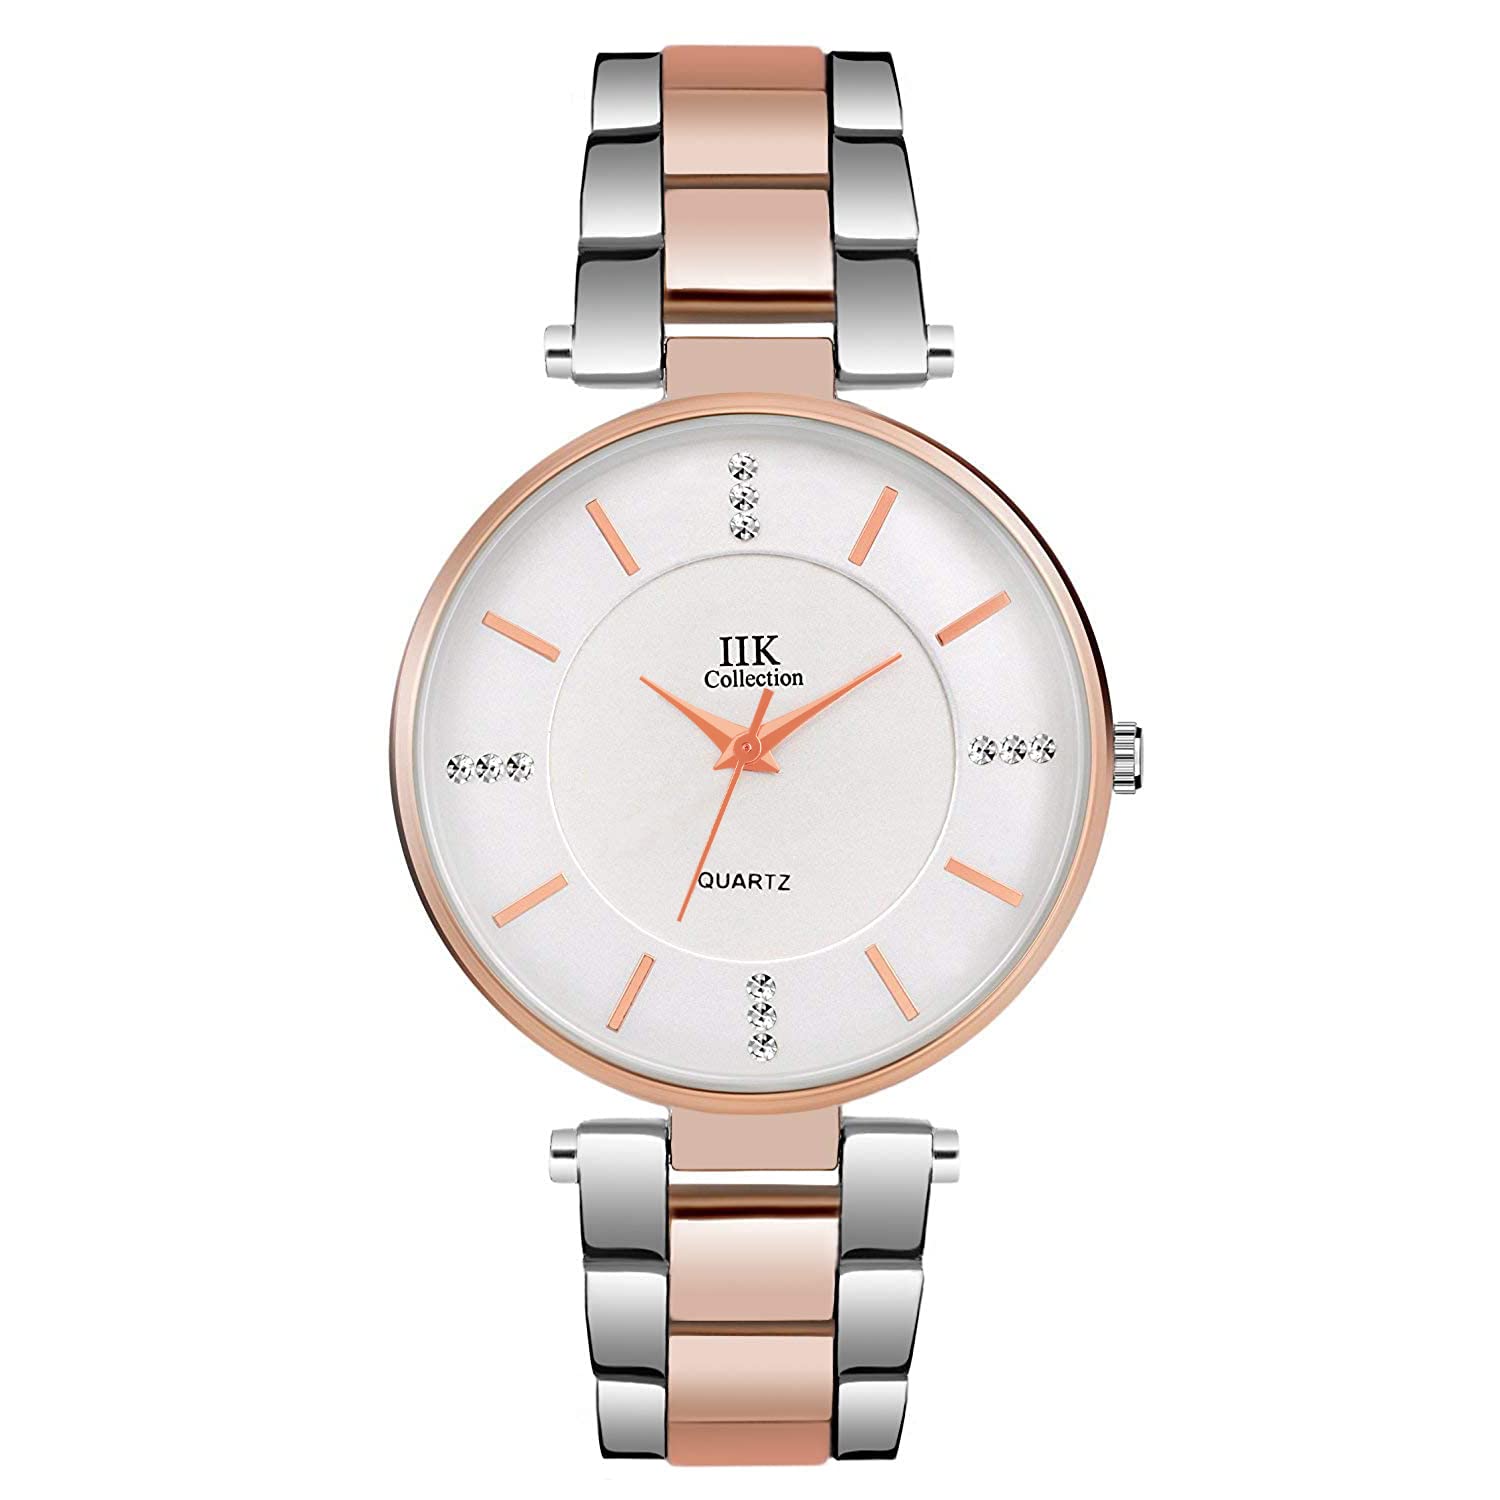 IIK COLLECTION Wrist Watch for Women